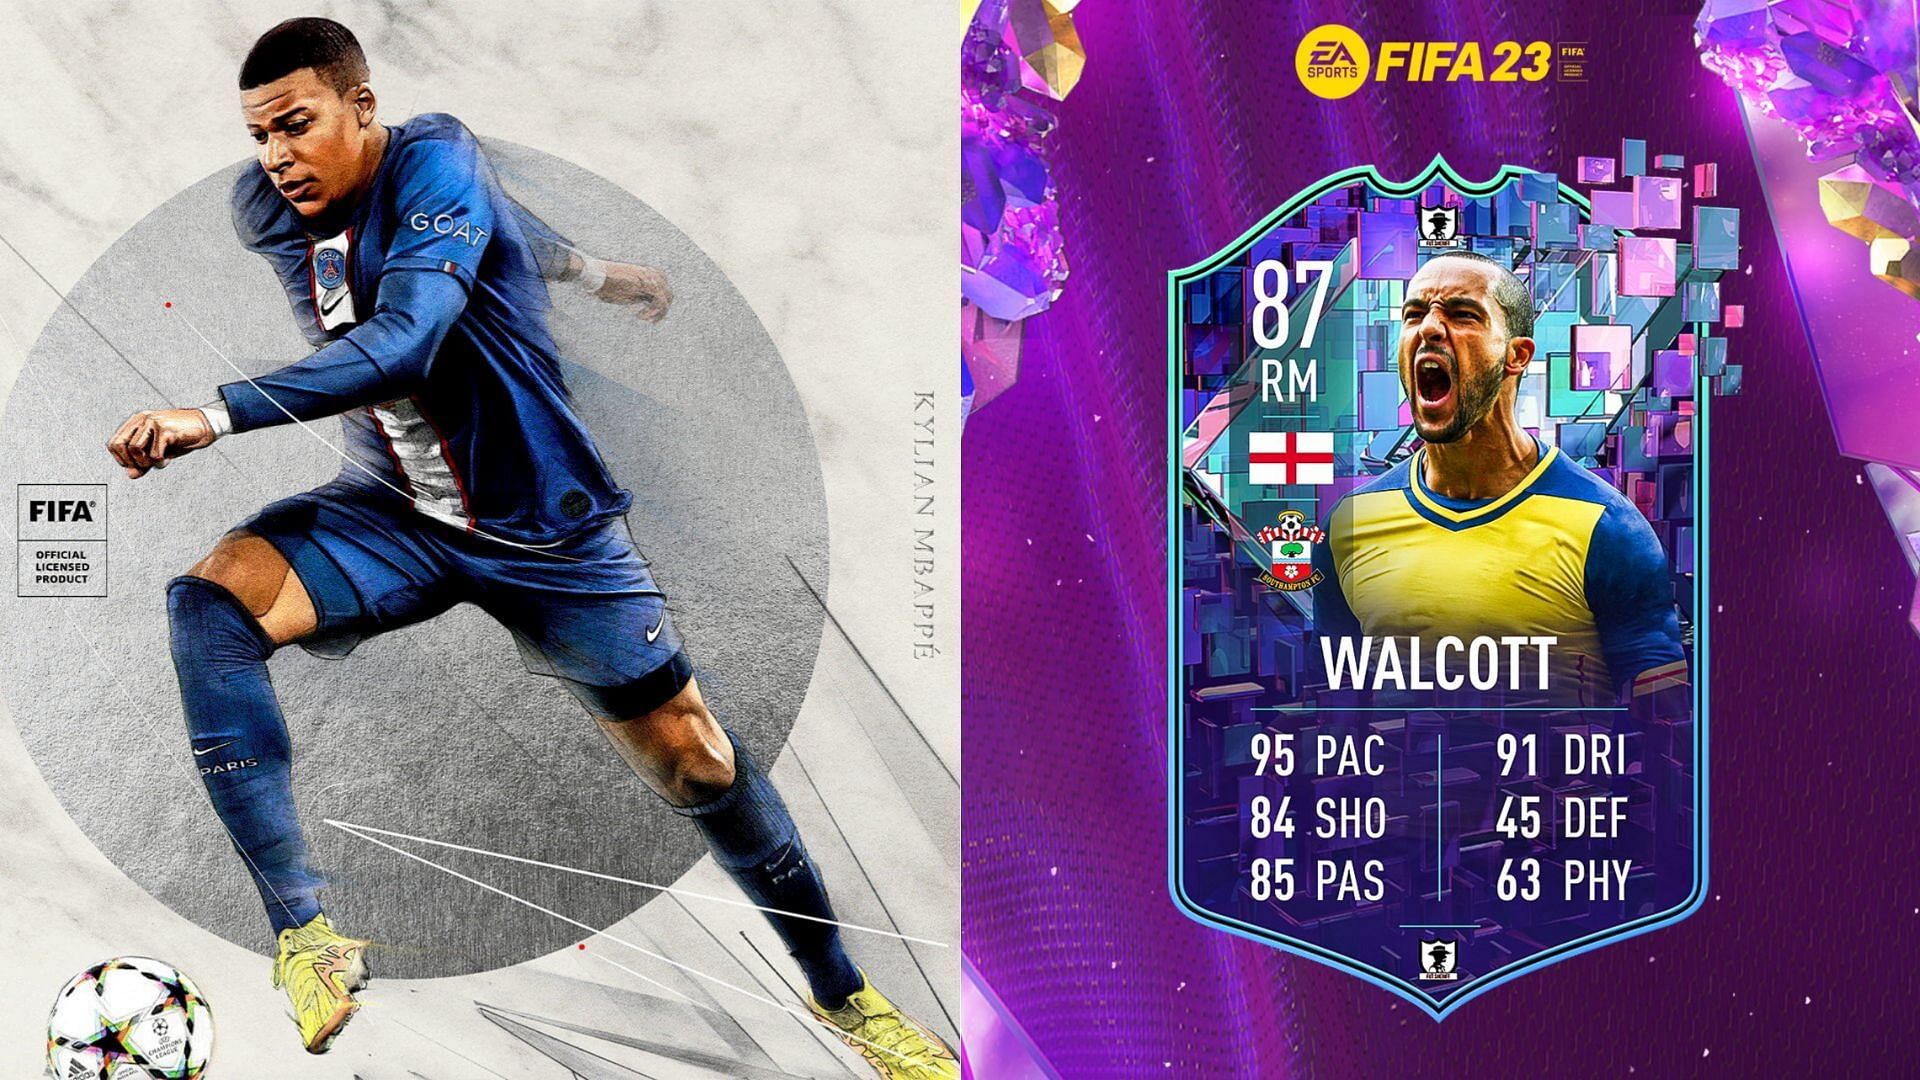 Fifa 23 Leak Hints At Theo Walcott Flashback Sbc Coming To Ultimate Team